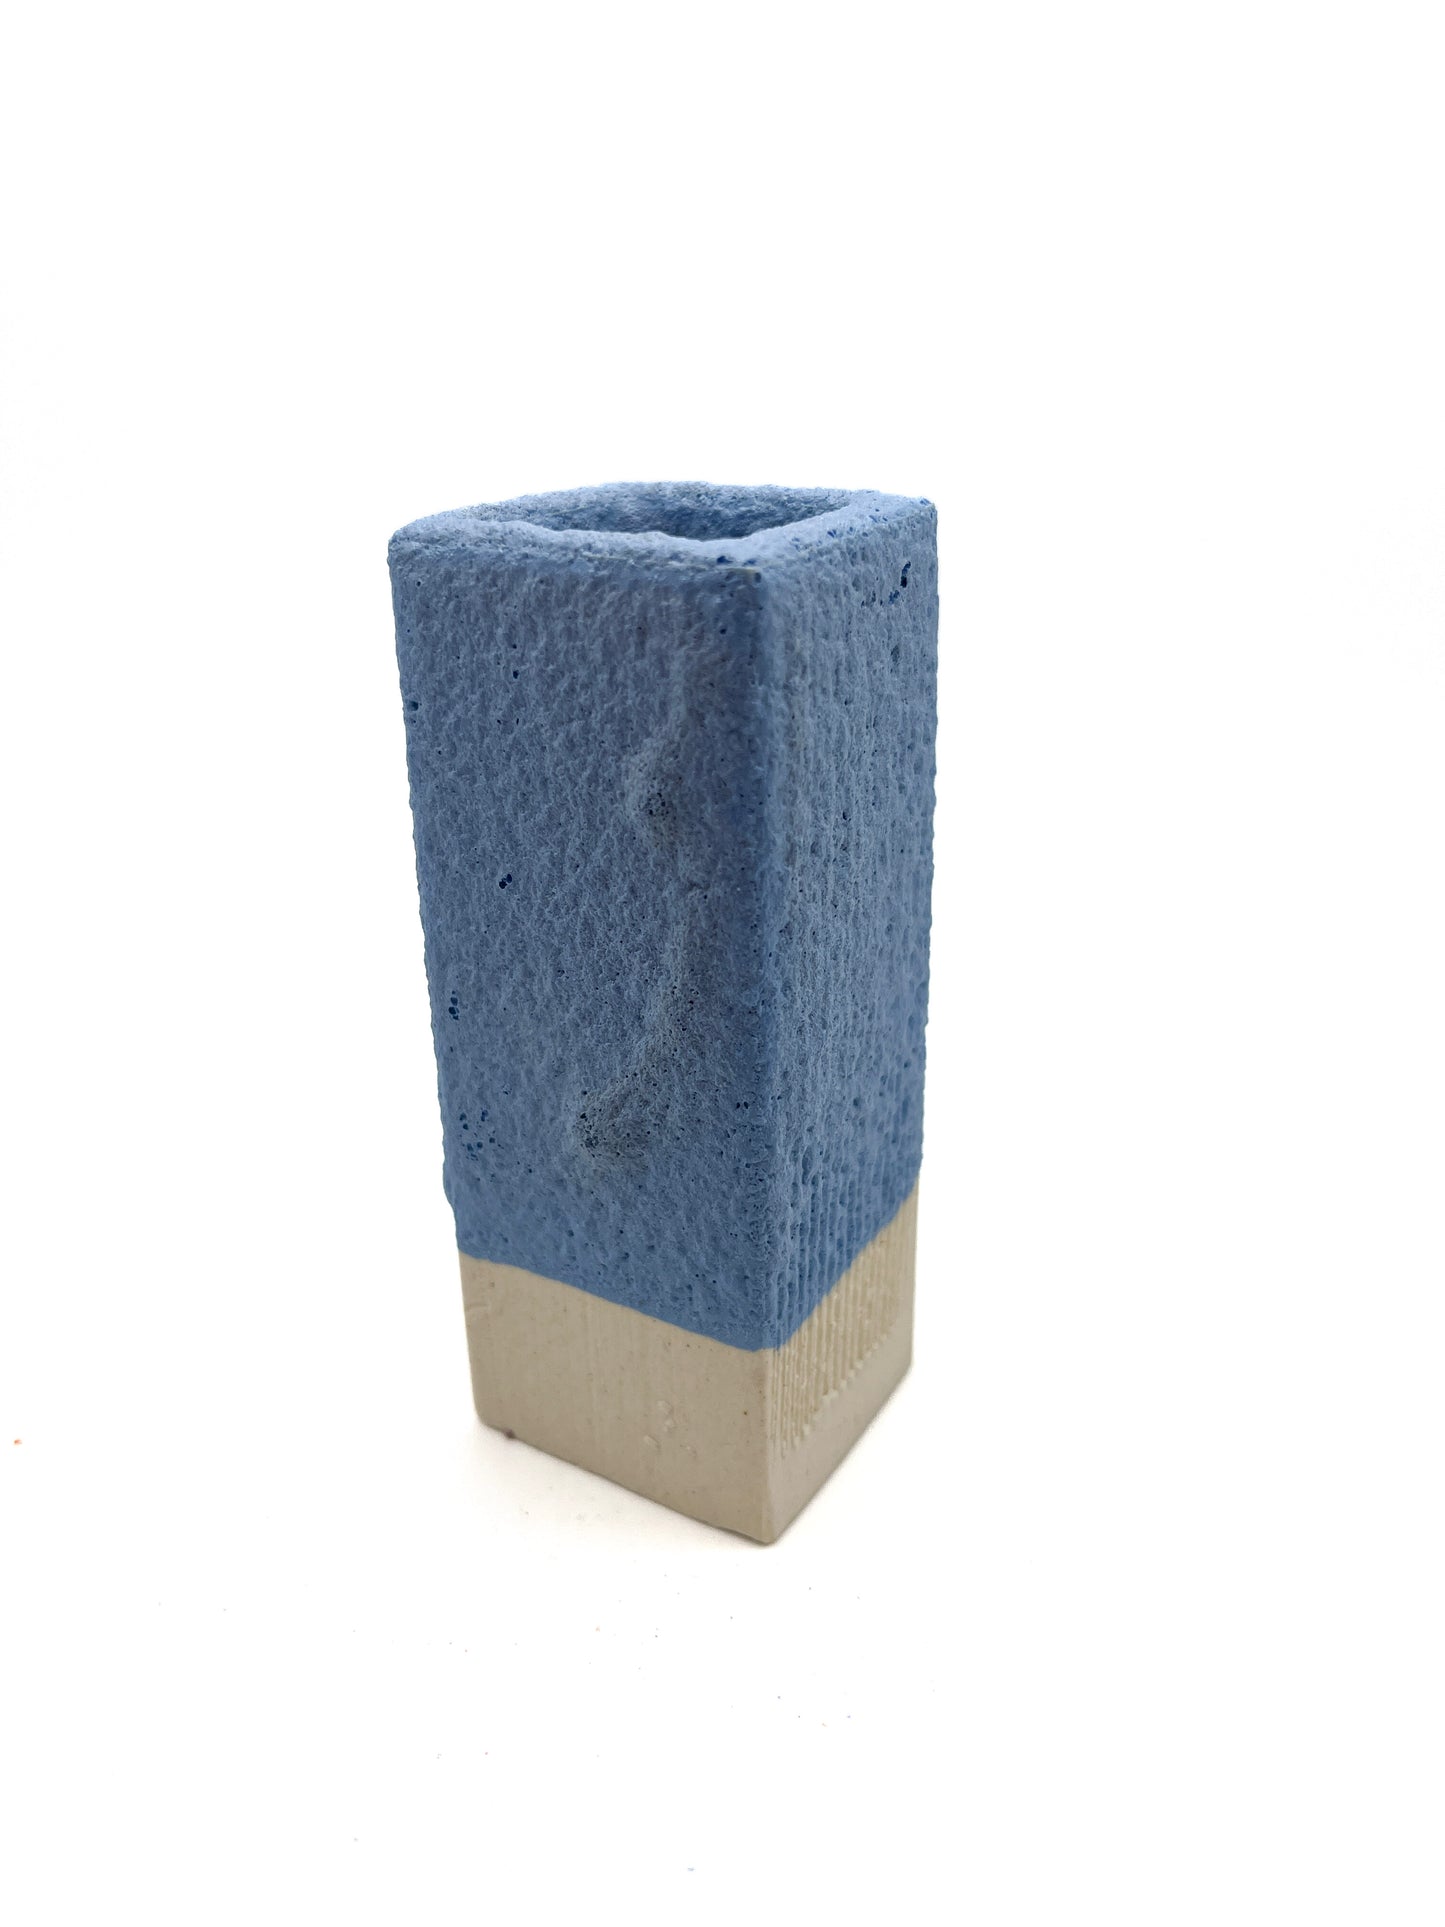 Fired test column for blue mini-puff glaze on light clay. Fuzzy texture when fired to cone 5 or 6.